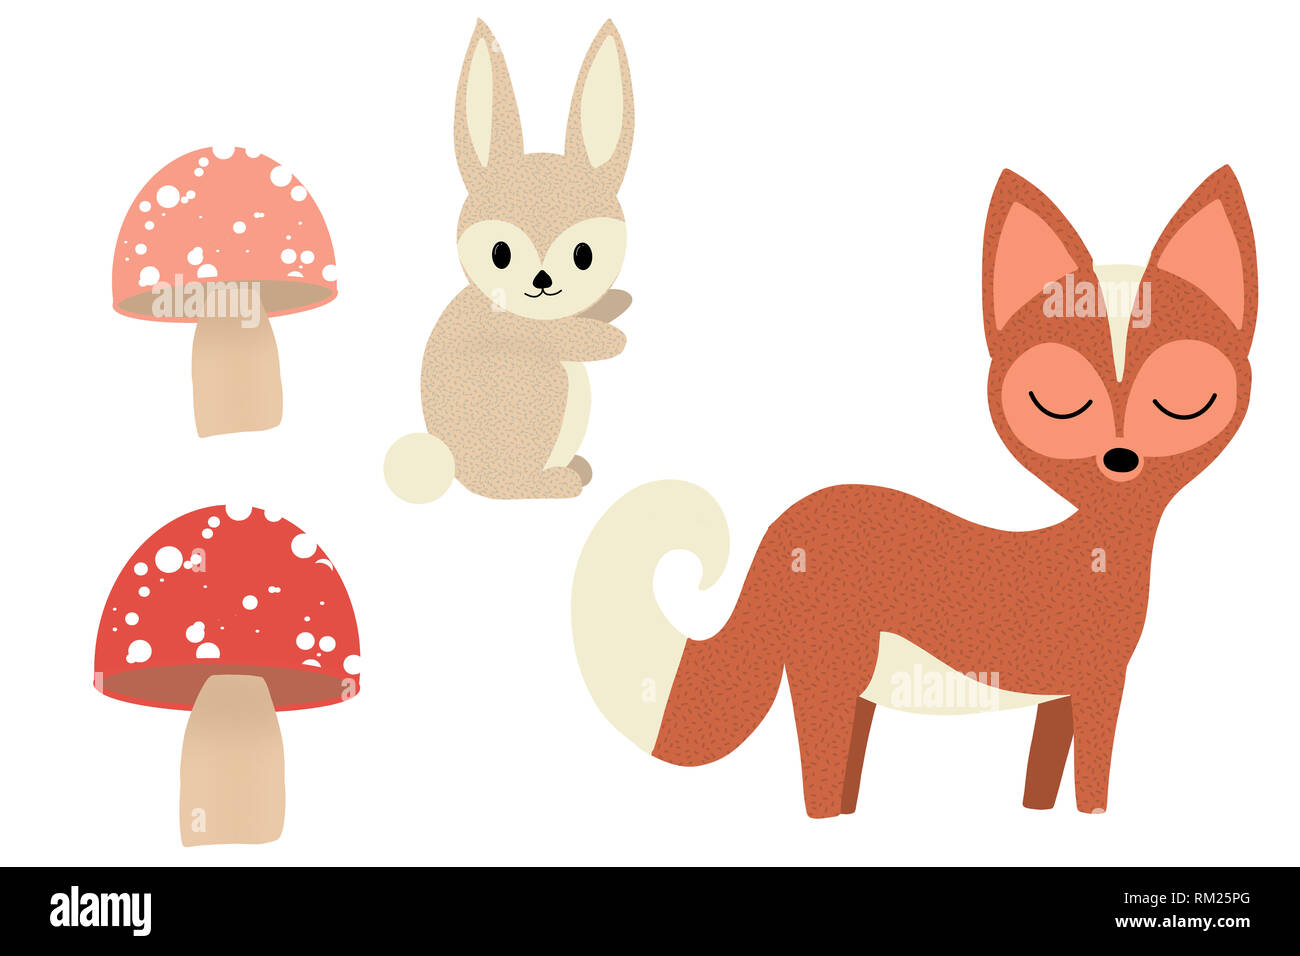 Cute Fox, Rabbit and Mushrooms isolated on white, hand drawn Illustration. Stock Photo